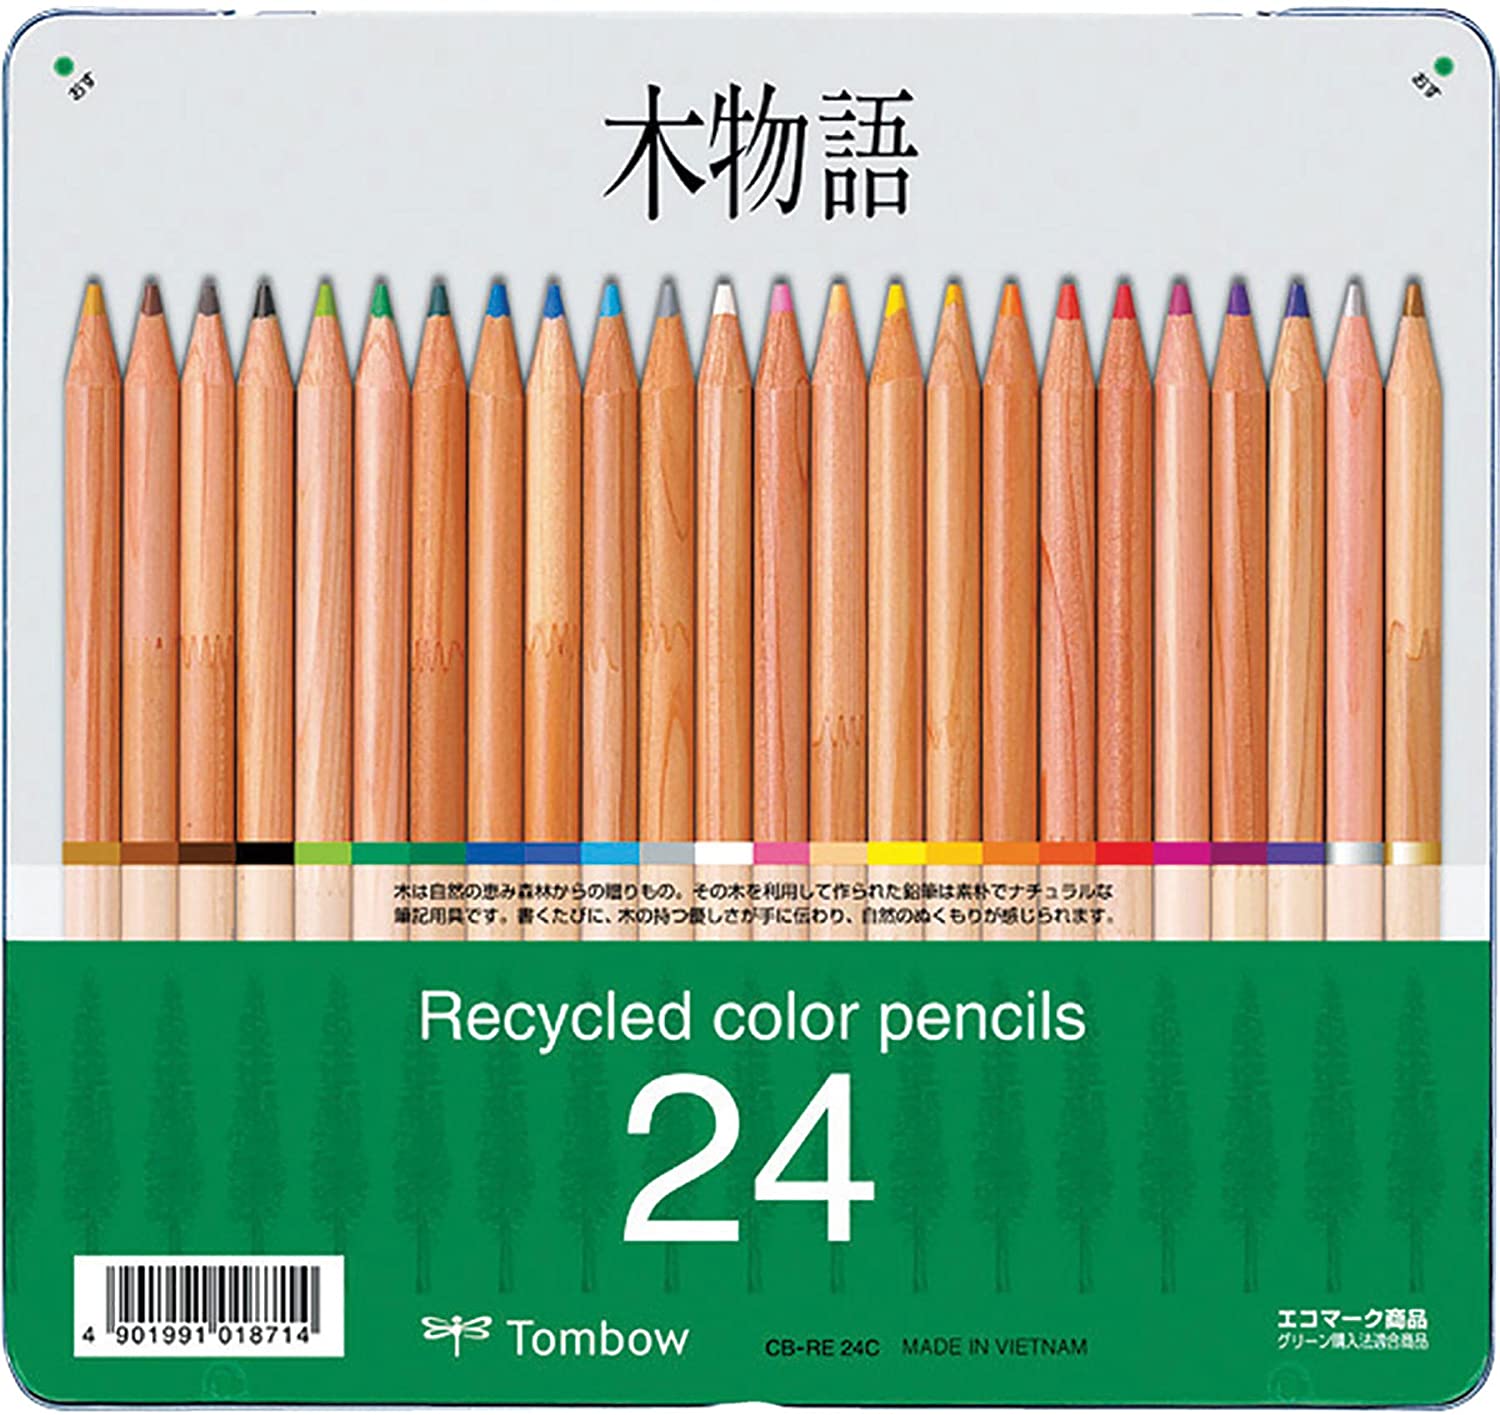 Tombow Recycled Colored Pencils - 24 pack tin